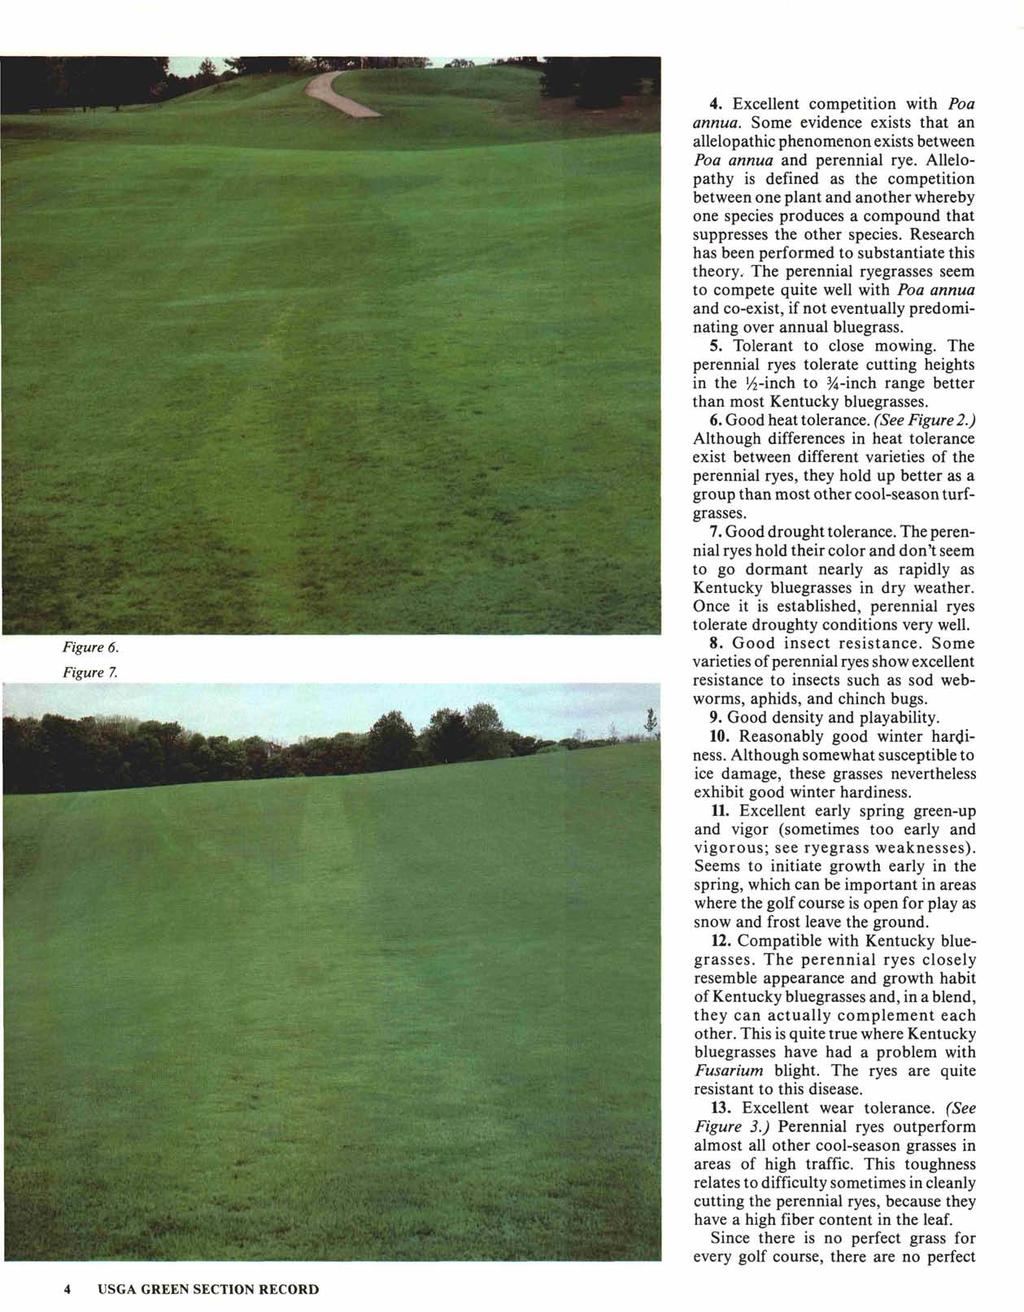 Figure 6. Figure 7. 4. Excellent competition with Poa annua. Some evidence exists that an allelopathic phenomenon exists between Poa annua and perennial rye.